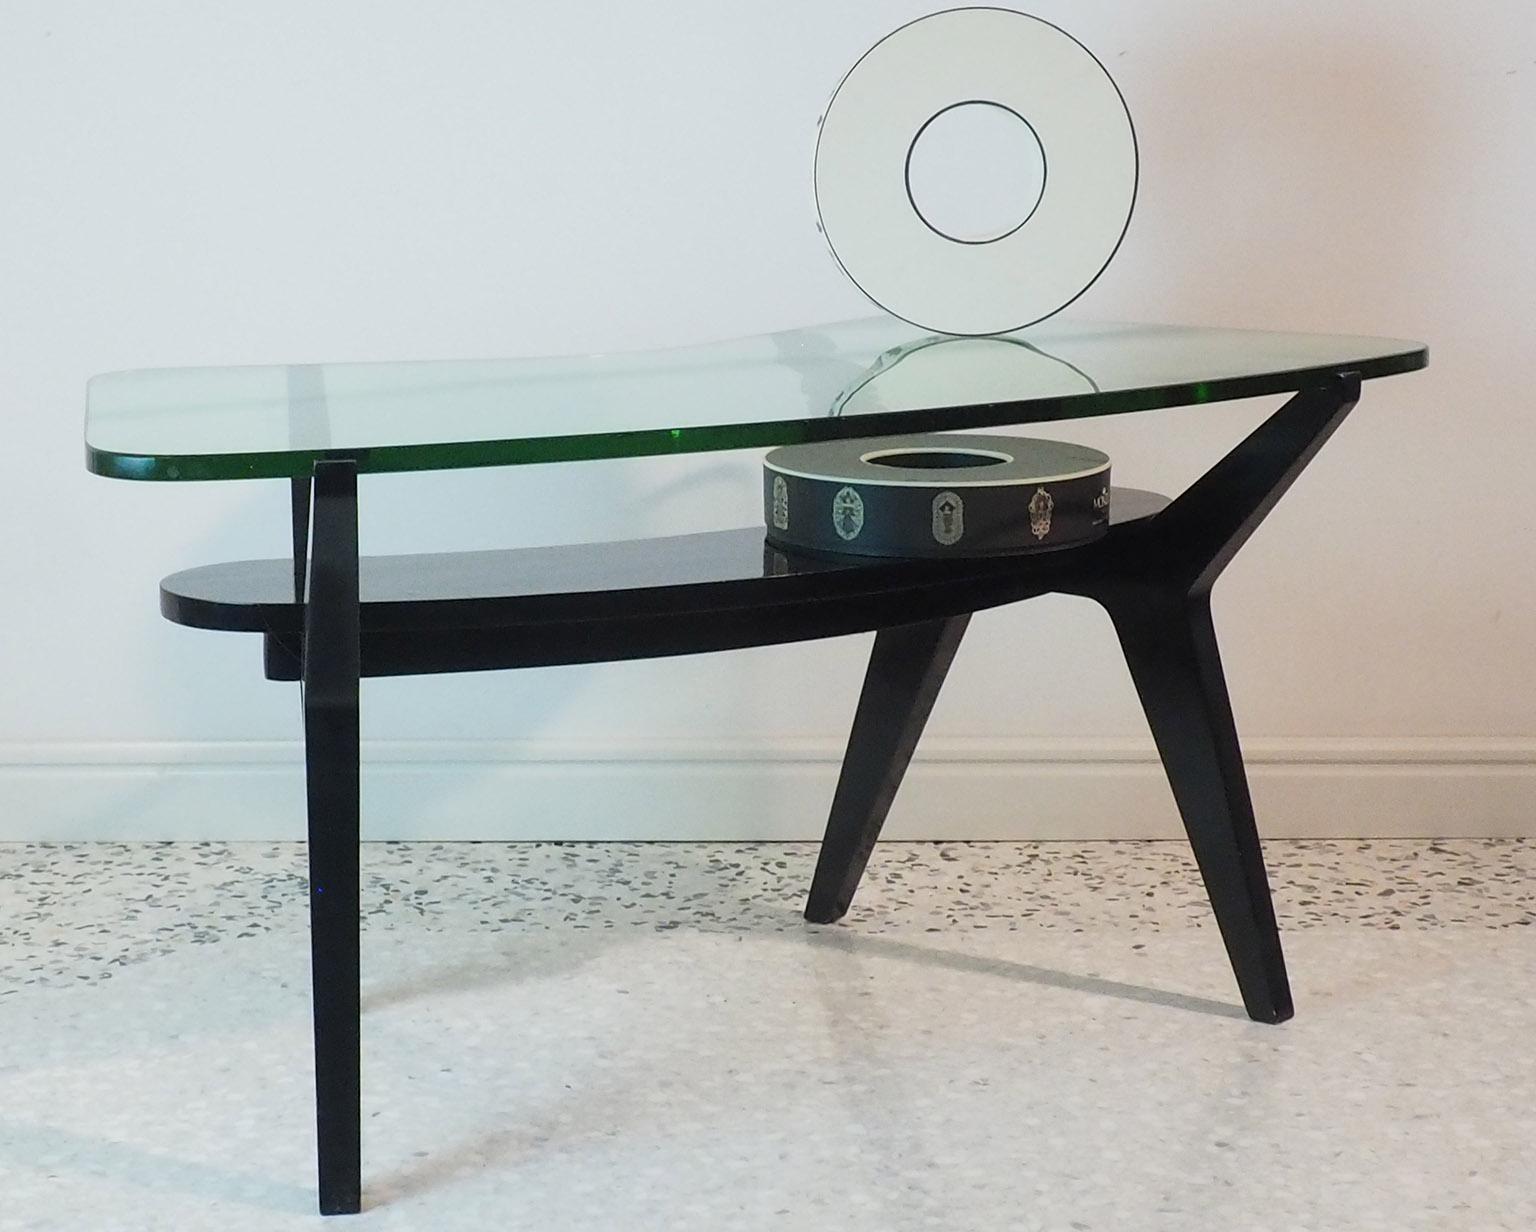 Extraordinary coffee table, with beautiful organic shape, typical of Italian midcentury style, designed by the great Italian architect Melchiorre Bega in Bologna.
Unique example
The strong structure in ebonized wood hold a thick original 'Verde